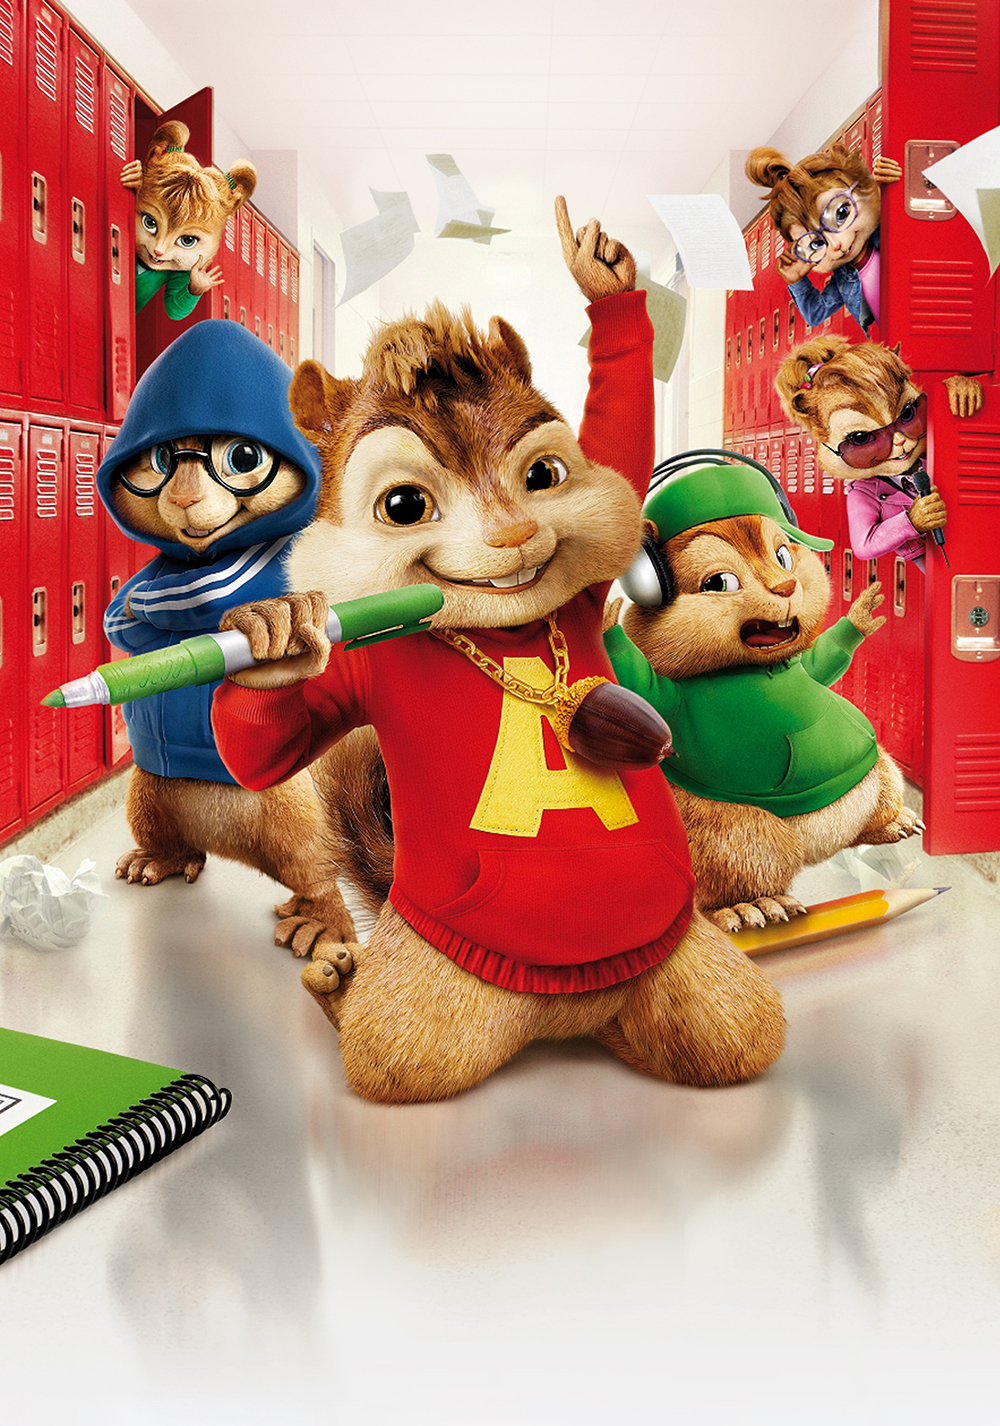 Alvin and the Chipmunks: The Squeakquel Movie Poster - ID: 71715 - Image .....